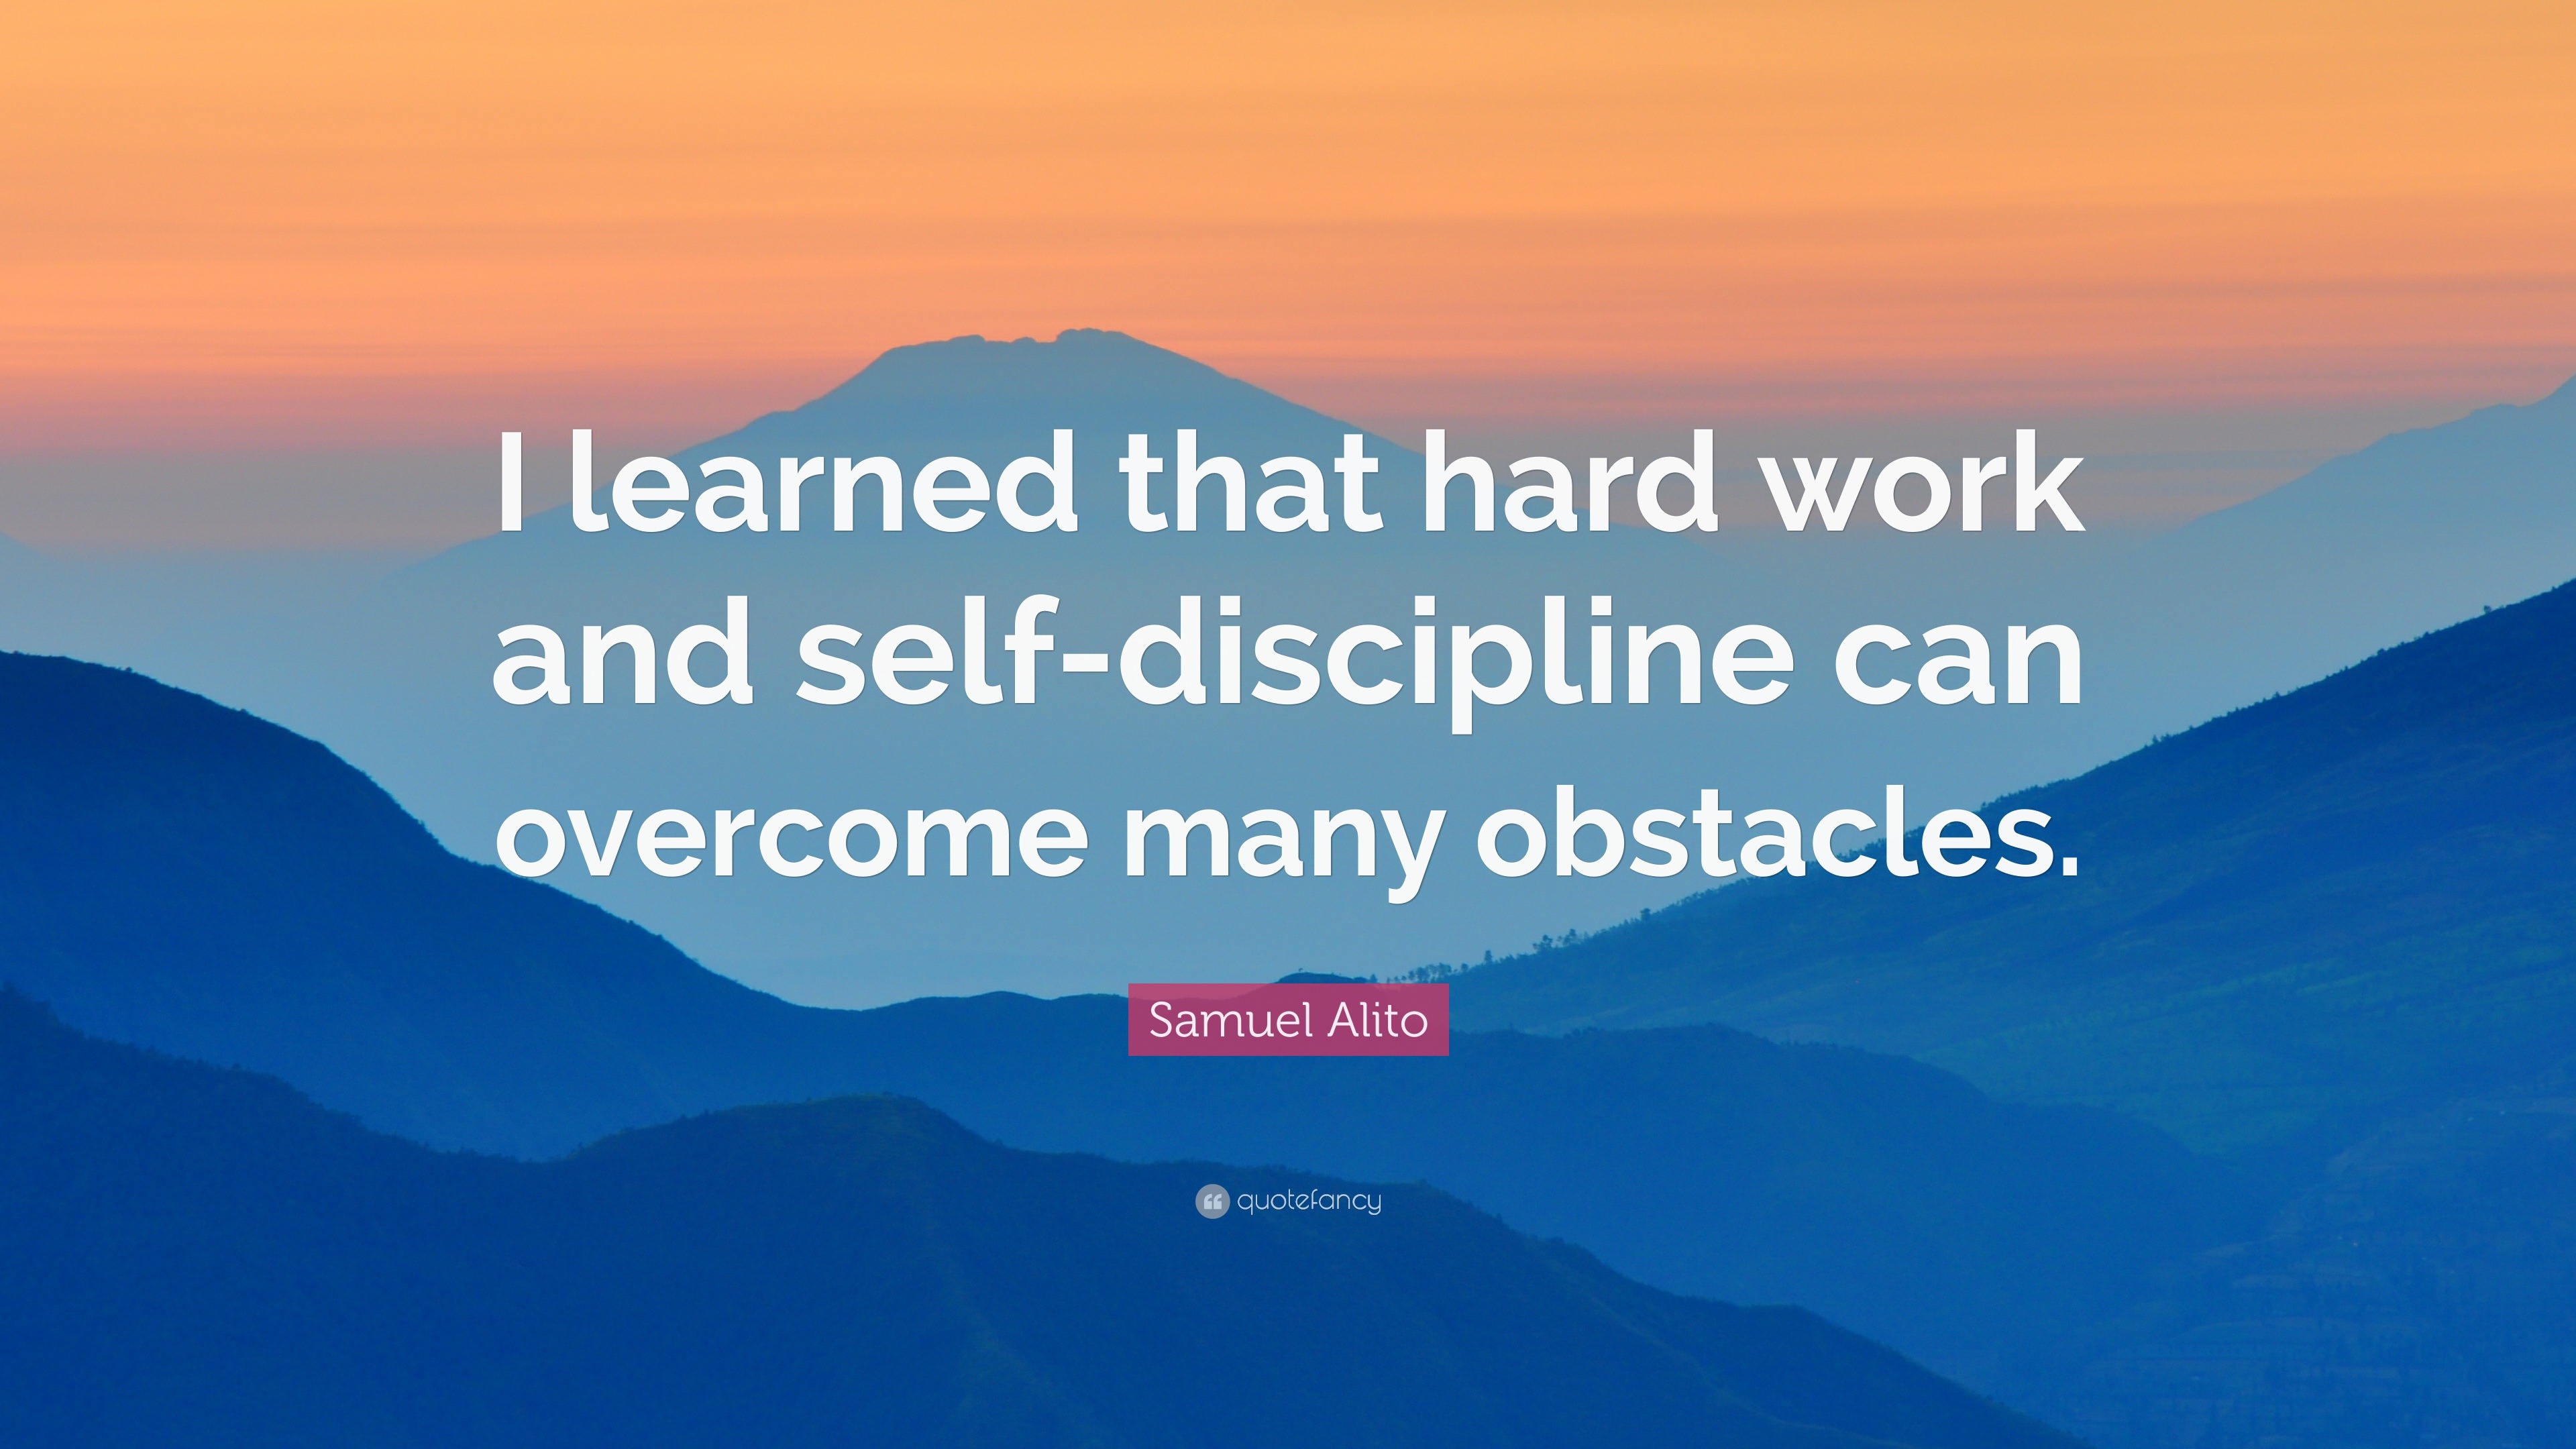 Samuel Alito Quote: “I learned that hard work and self-discipline can ...